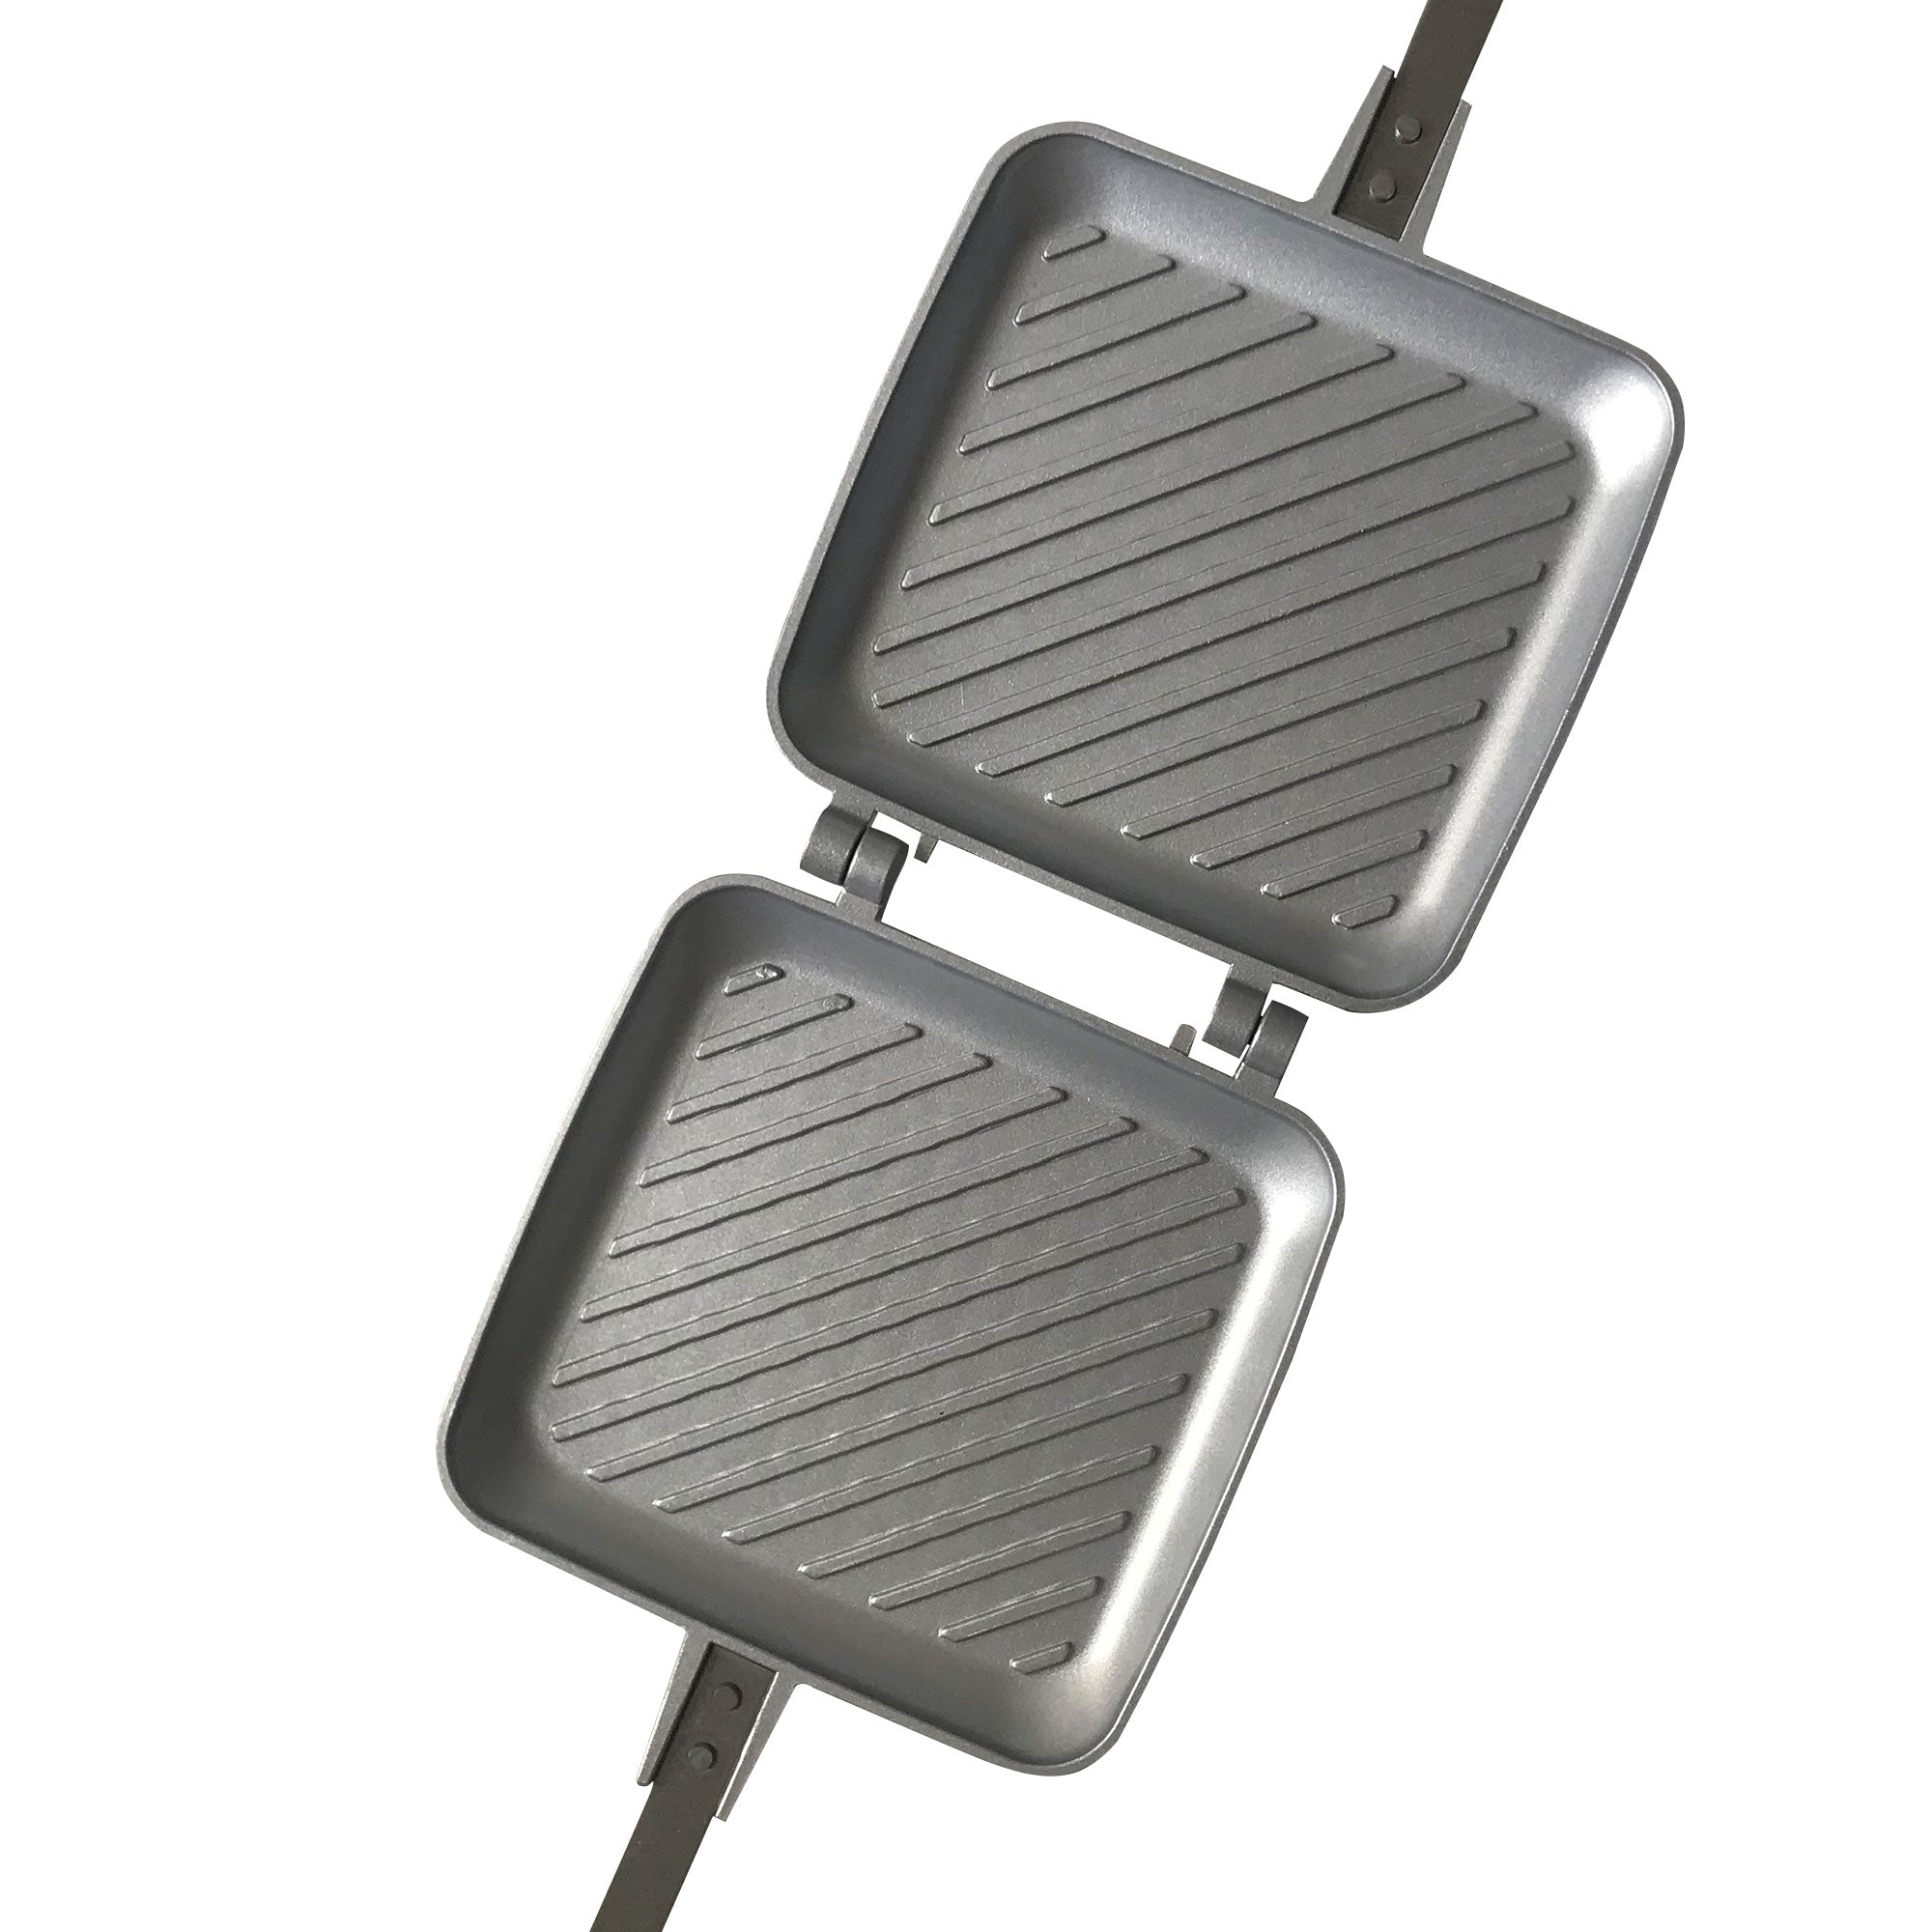 Everso Toastie Maker Non-Stick Stovetop with Heat-Resistant